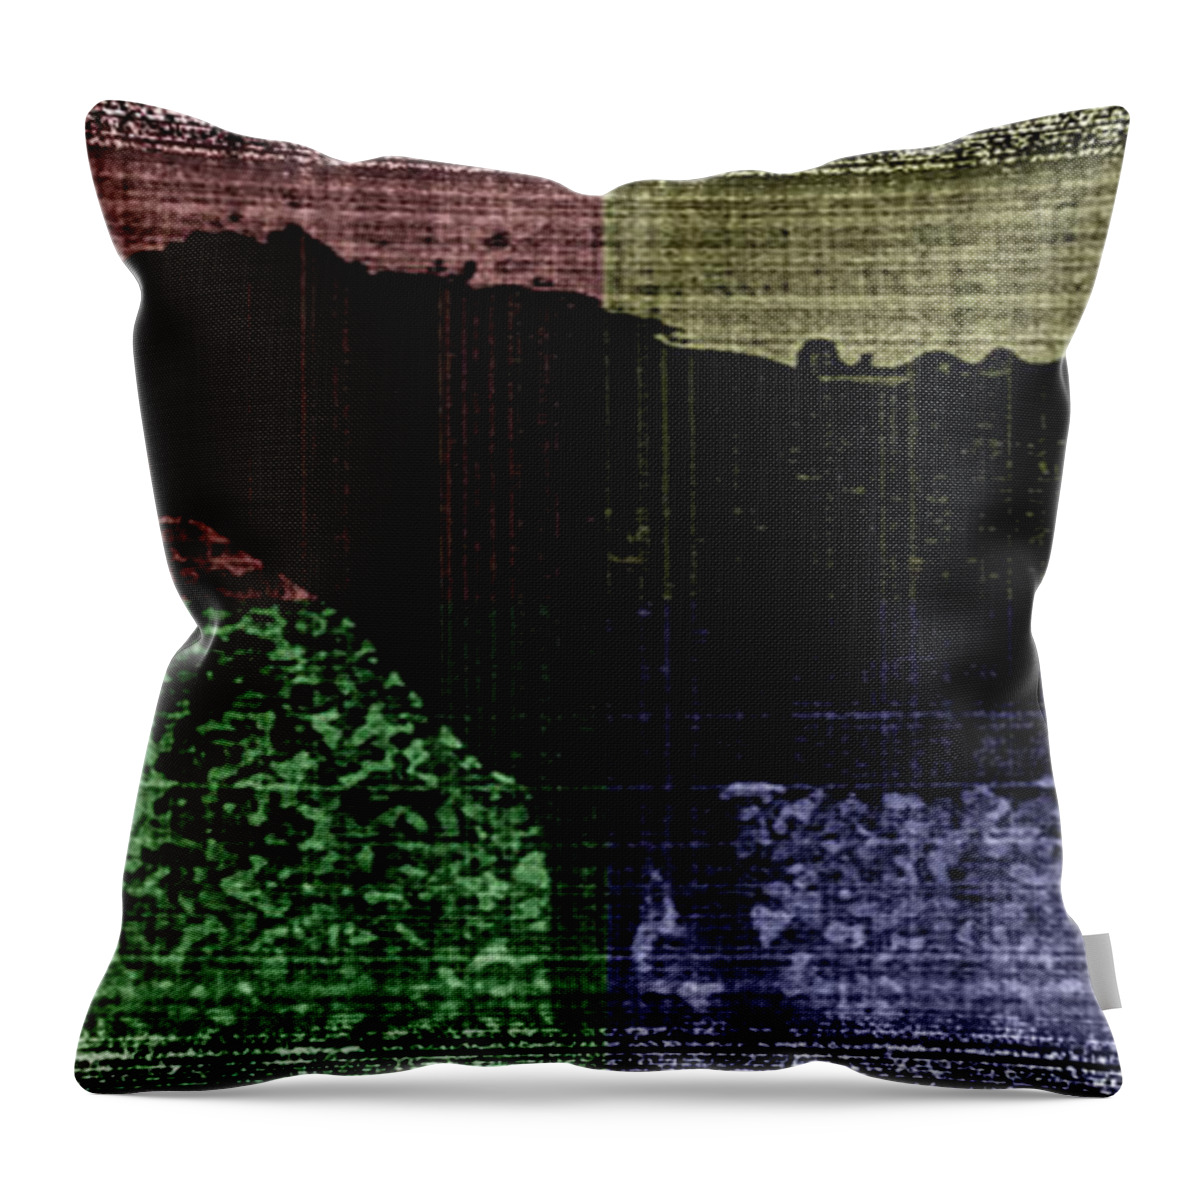 Boy Throw Pillow featuring the digital art Boy With Horse II by Cathy Anderson